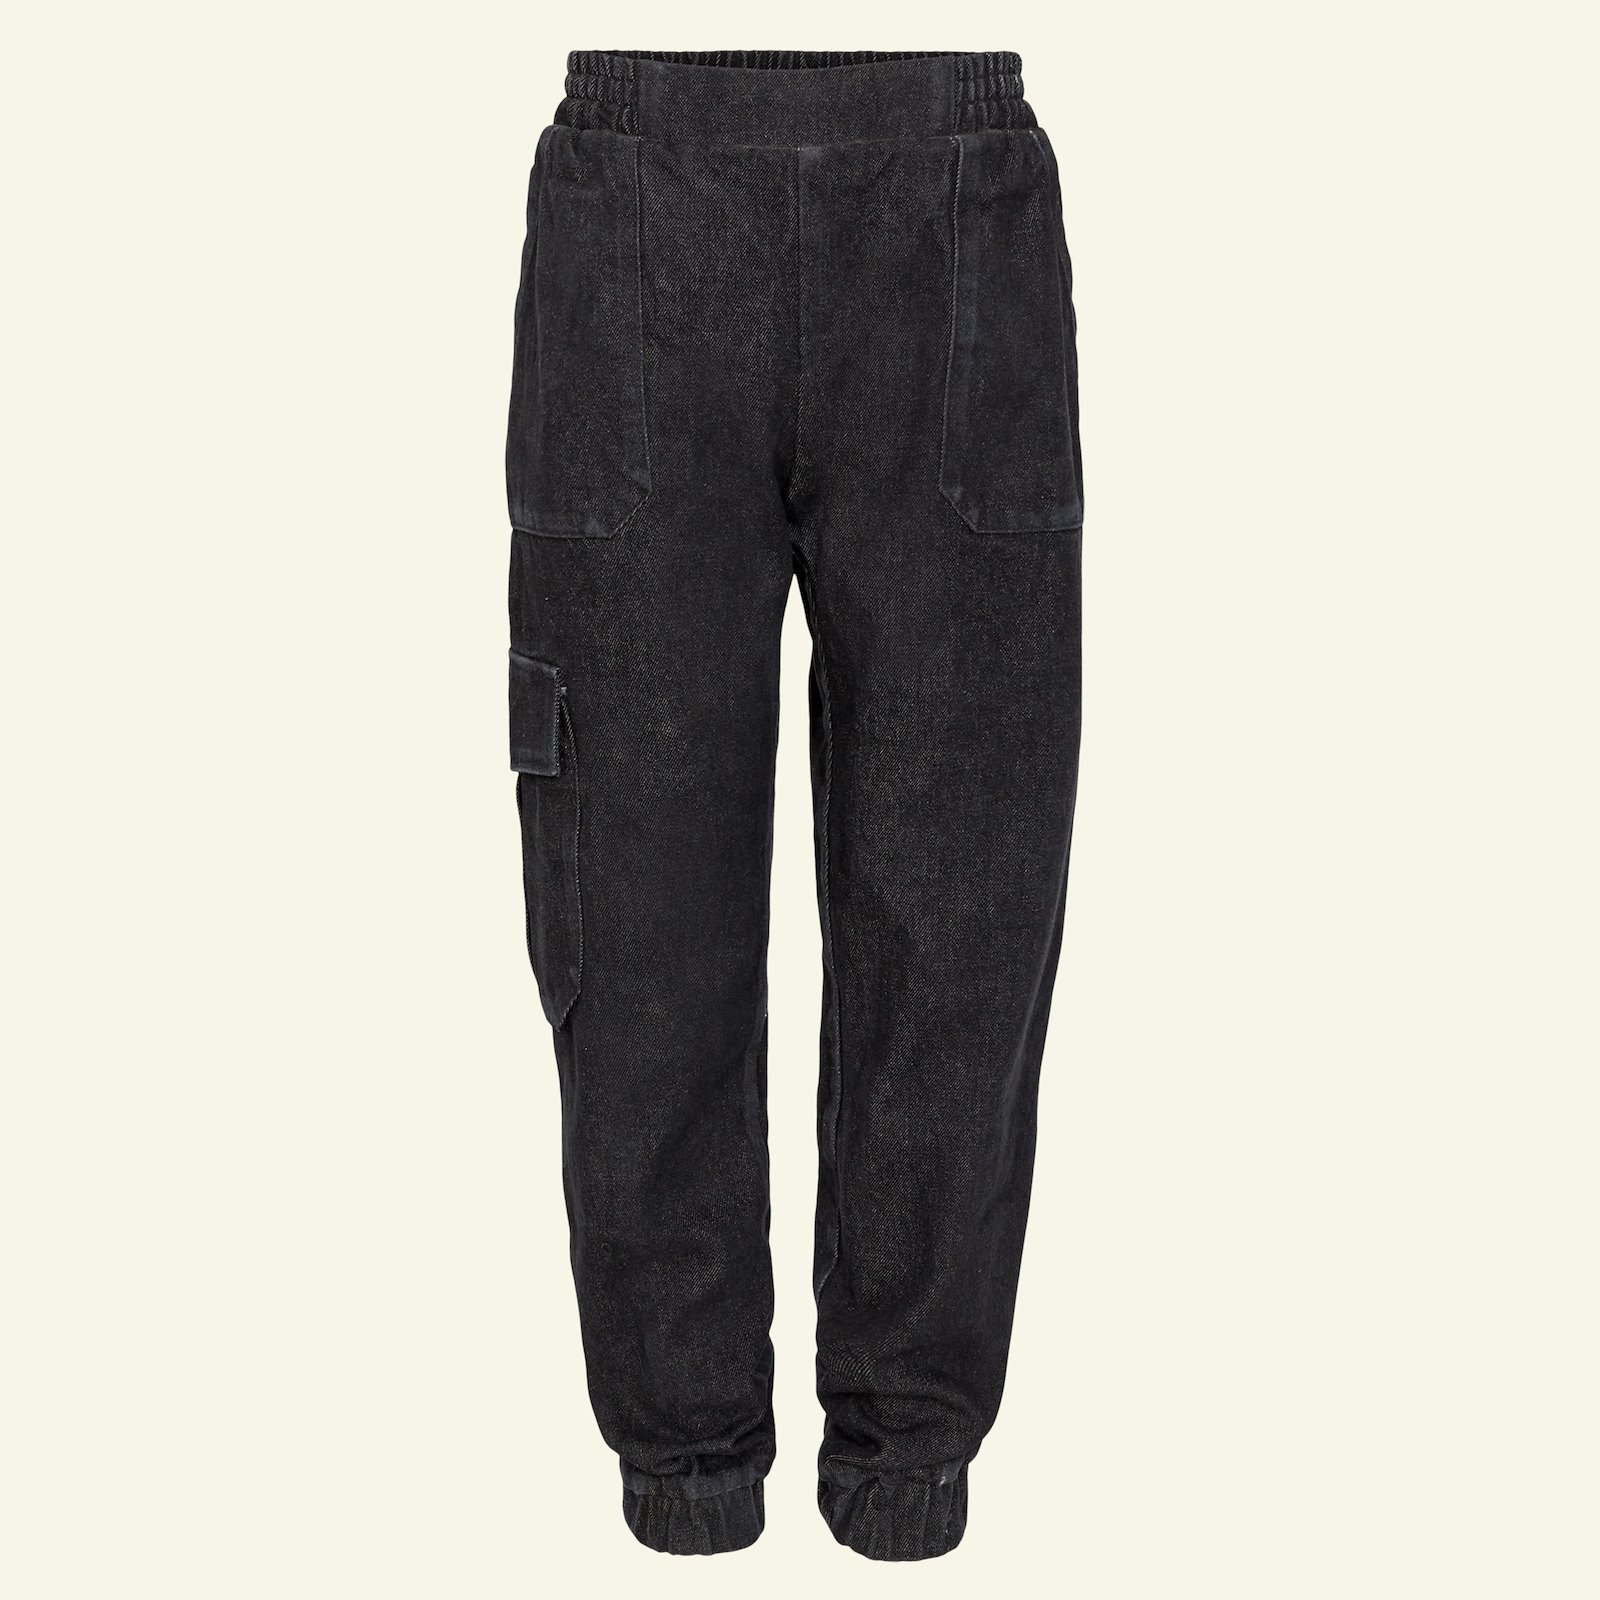 Cargo trousers, 128/8y p60037_5343_sskit